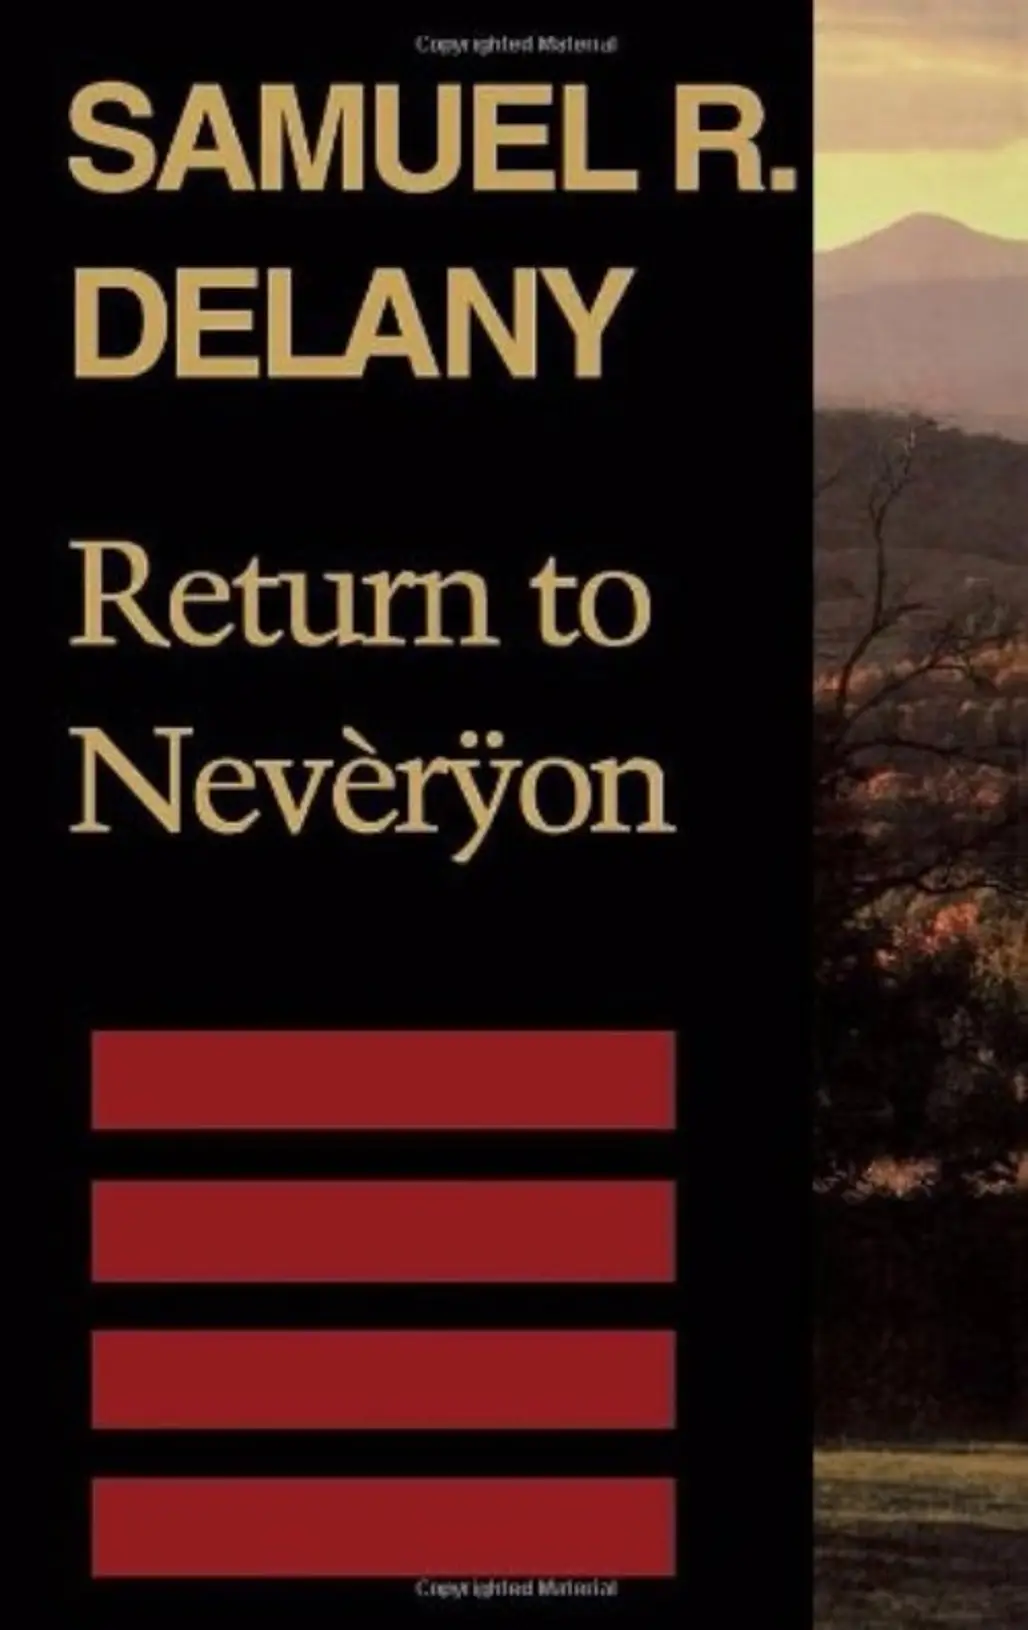 The Return to Neveryon Series by Samuel R. Delany